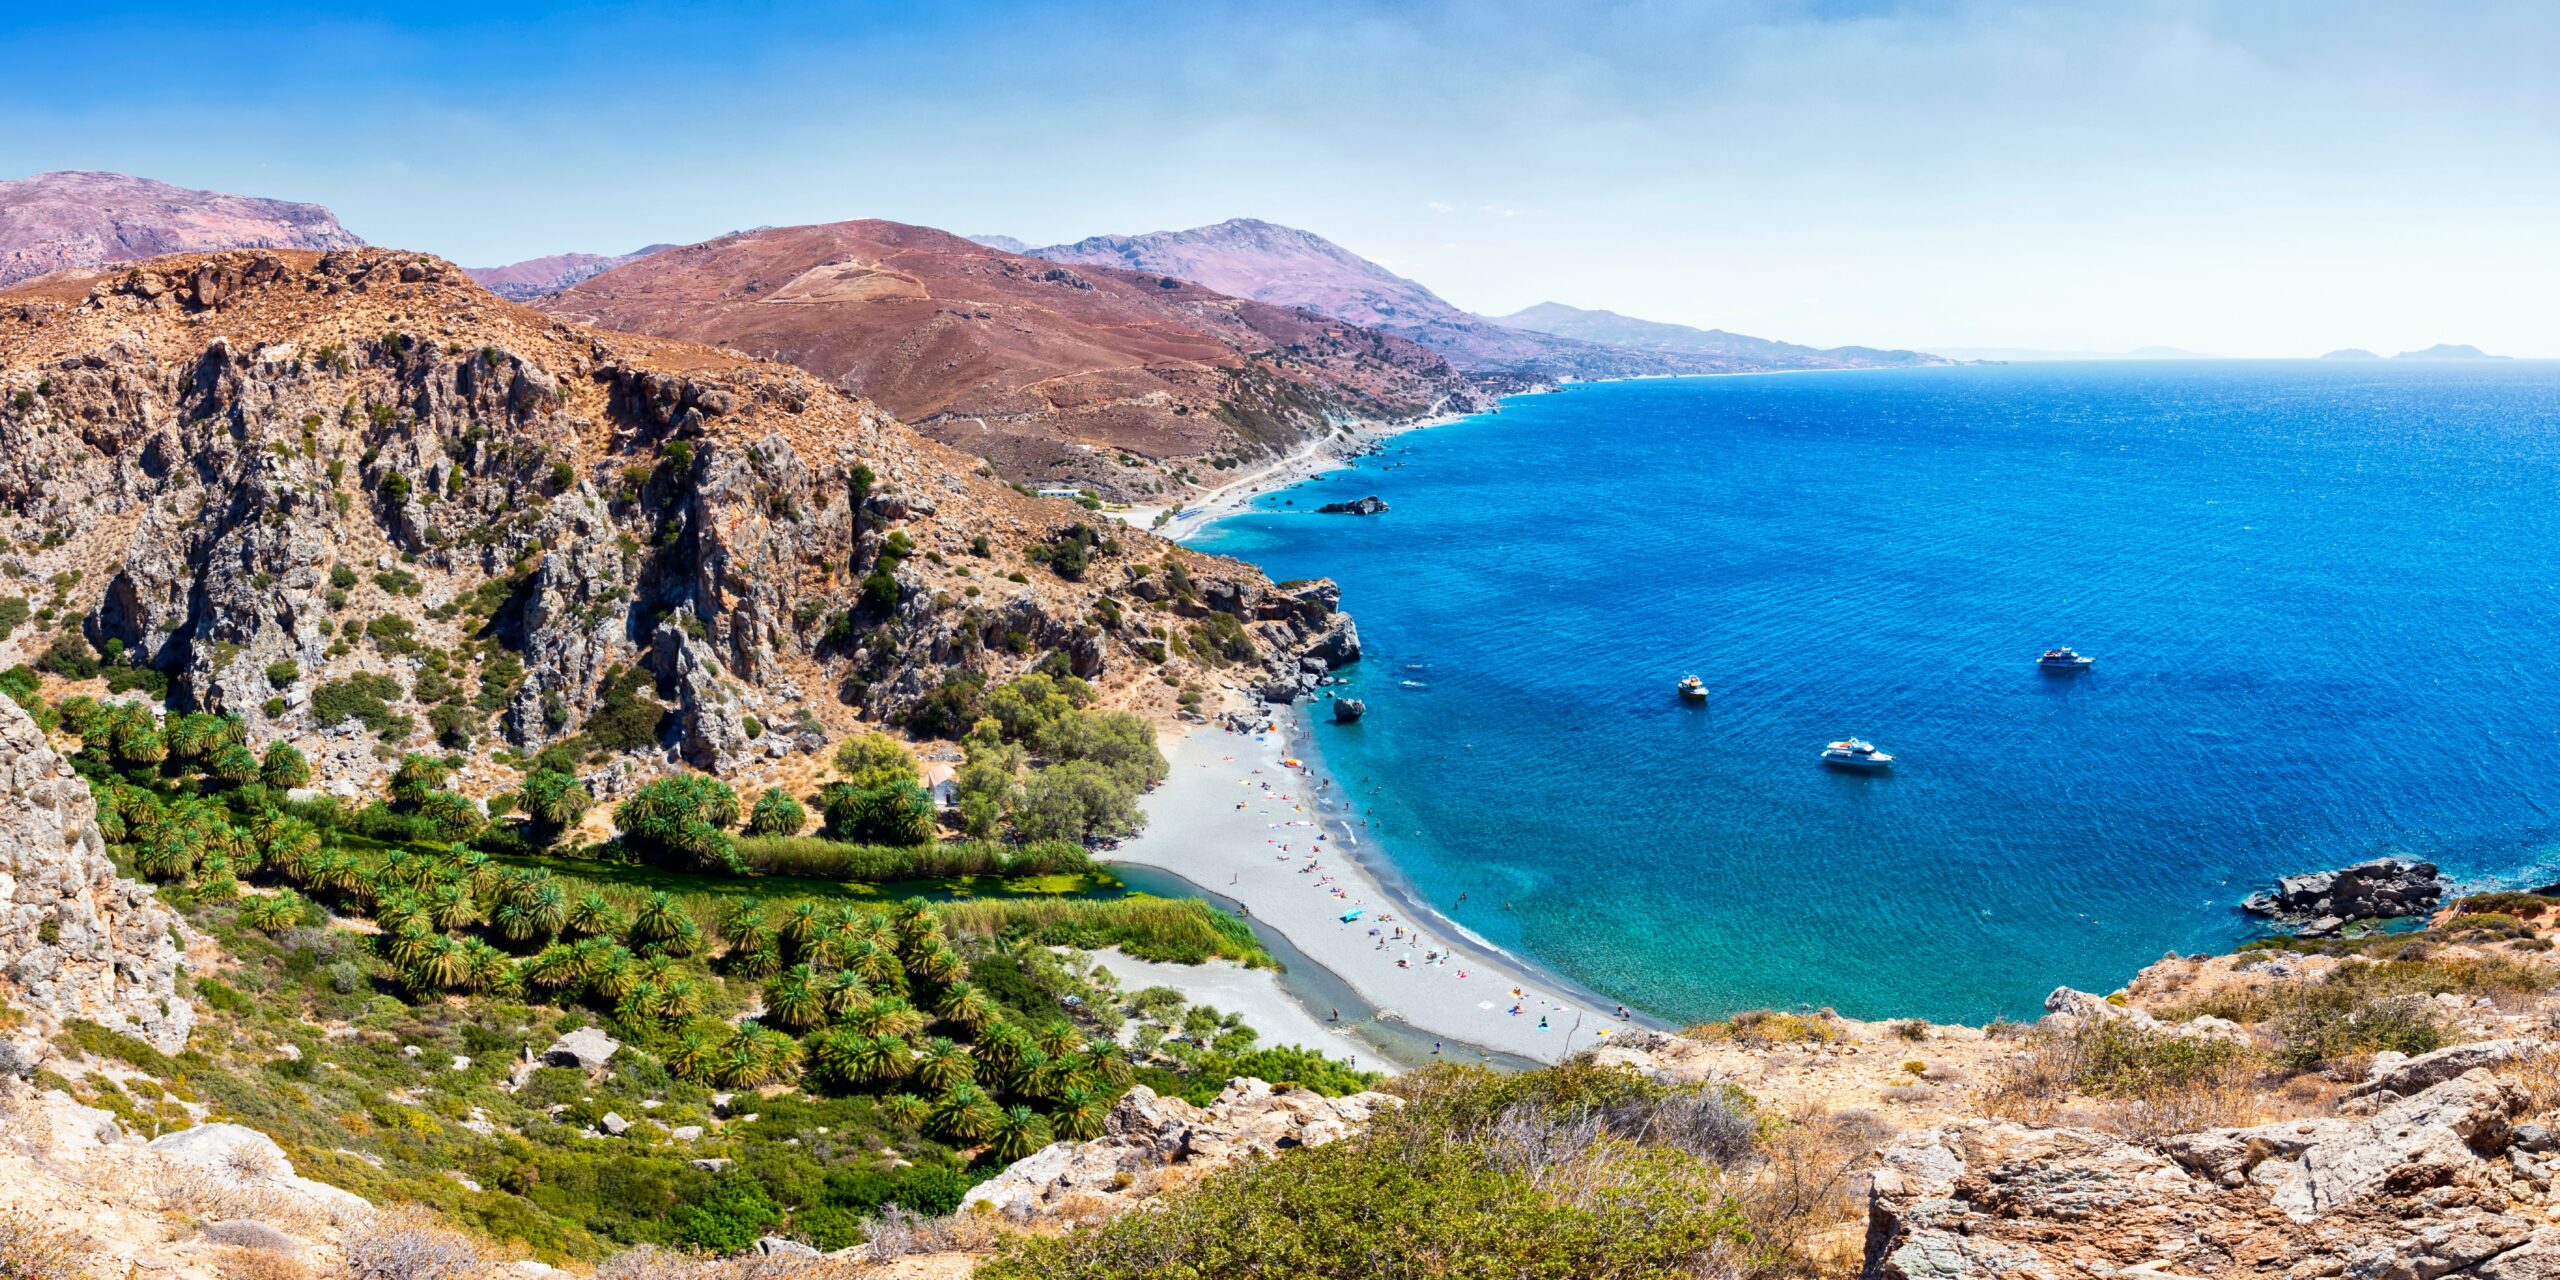 Panoramic view of a curving coastline with a blue sea, sandy beach, palm trees, and surrounding mountains.